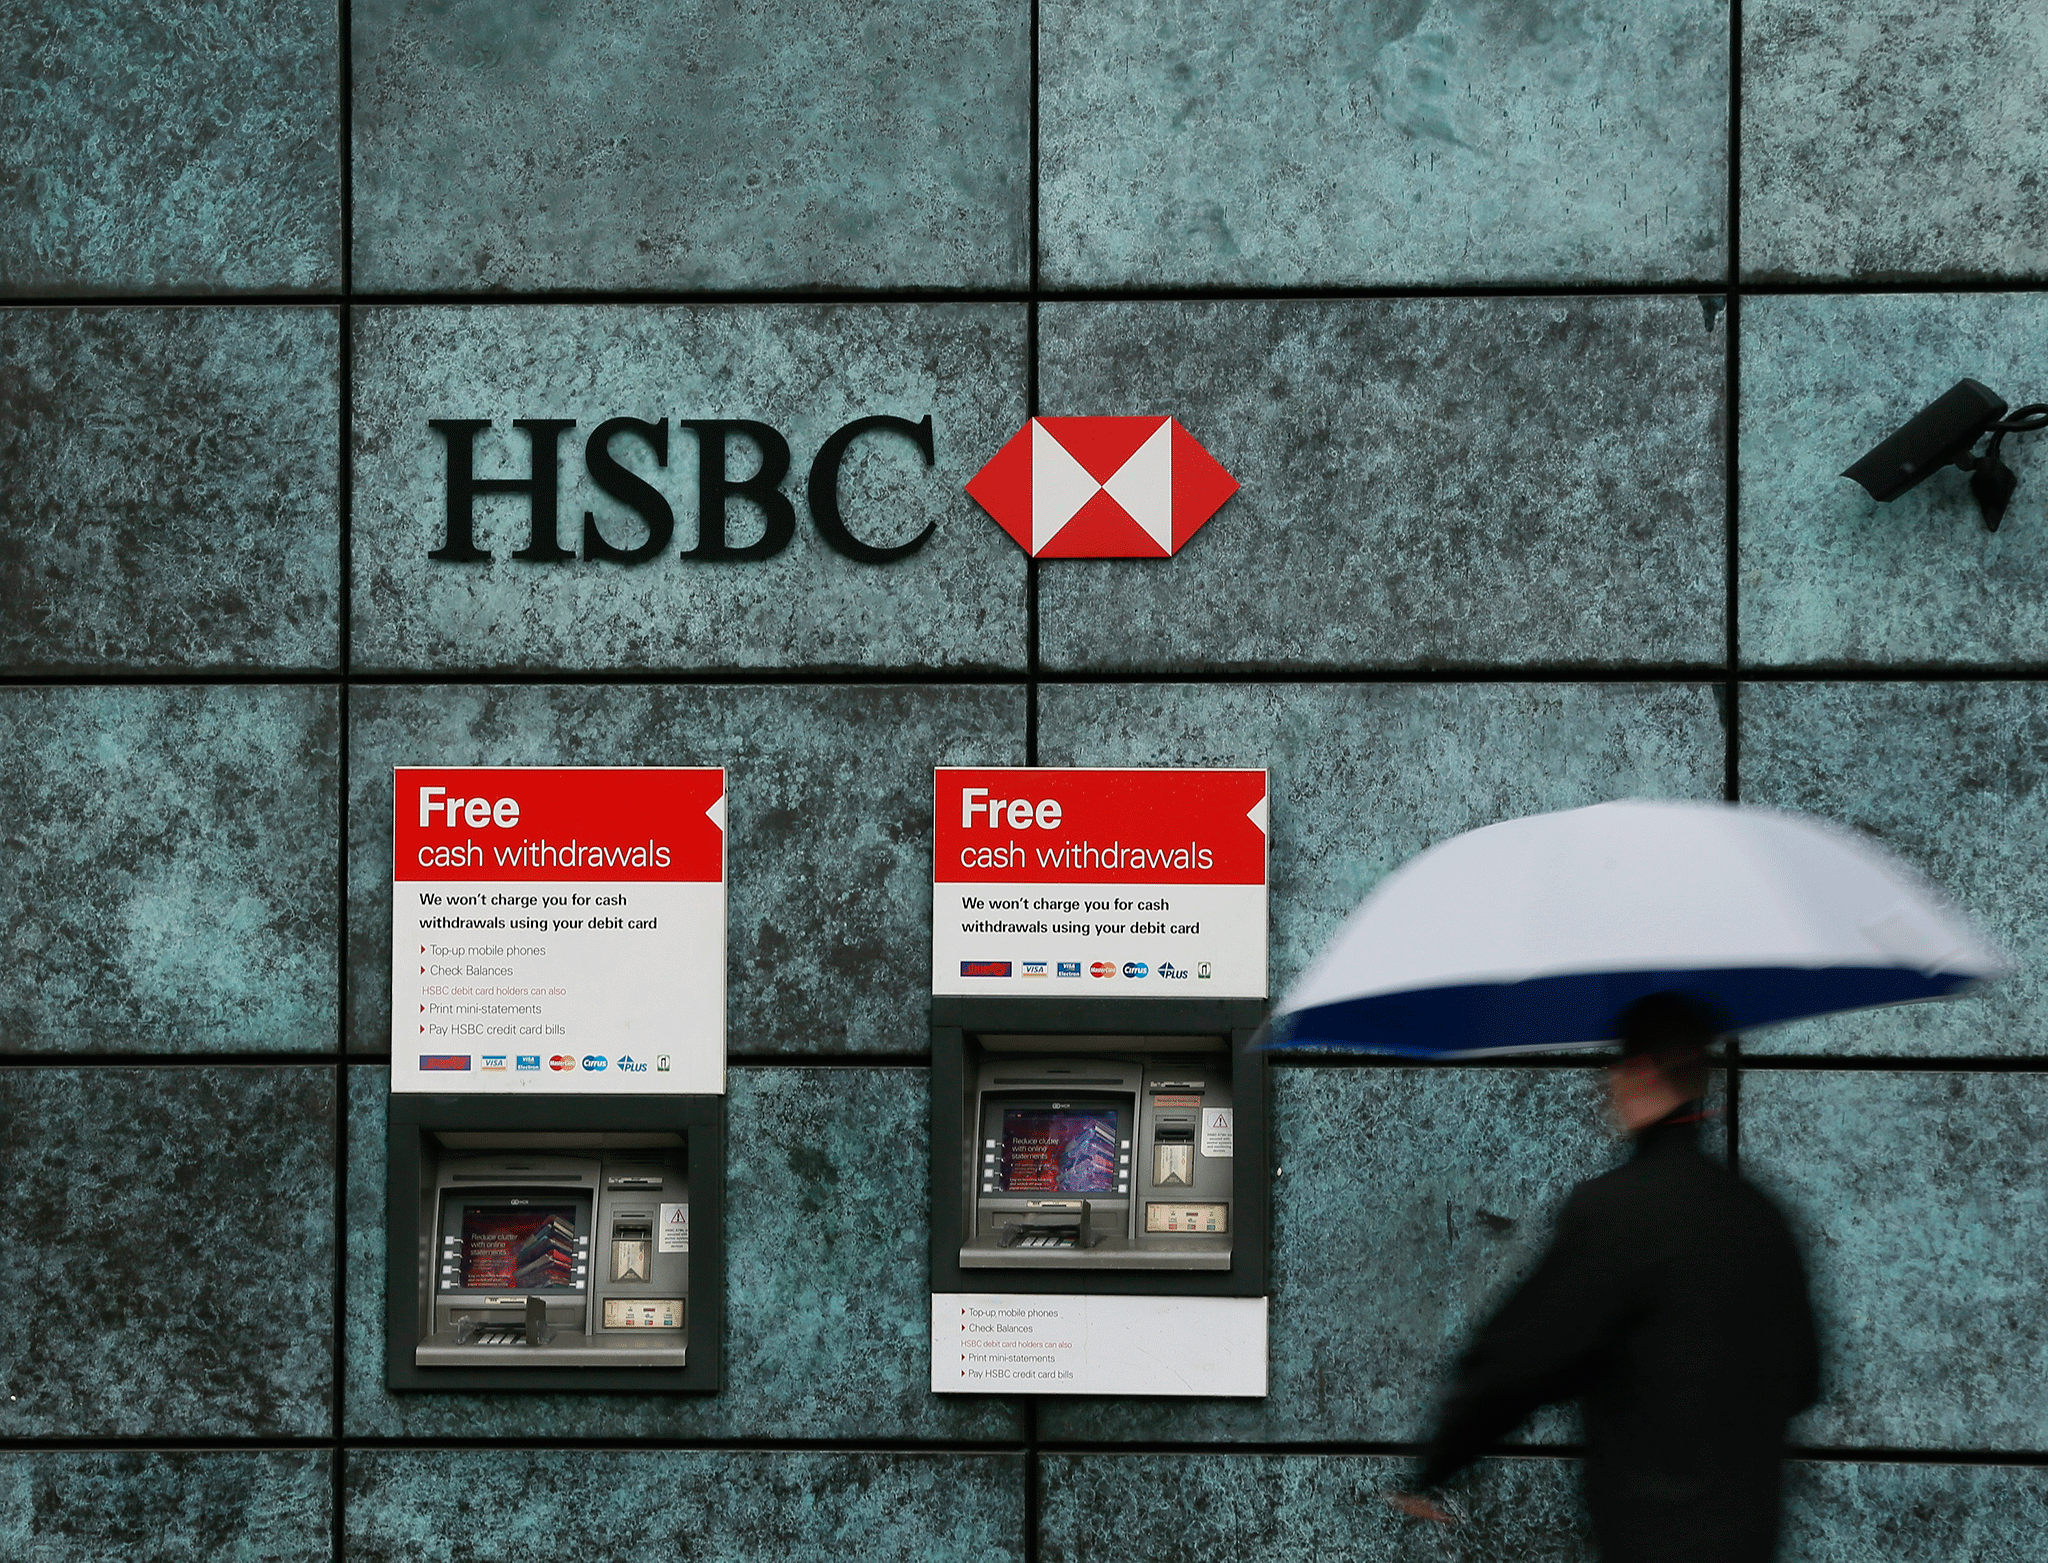 HSBC has been closing branches at a rapid rate